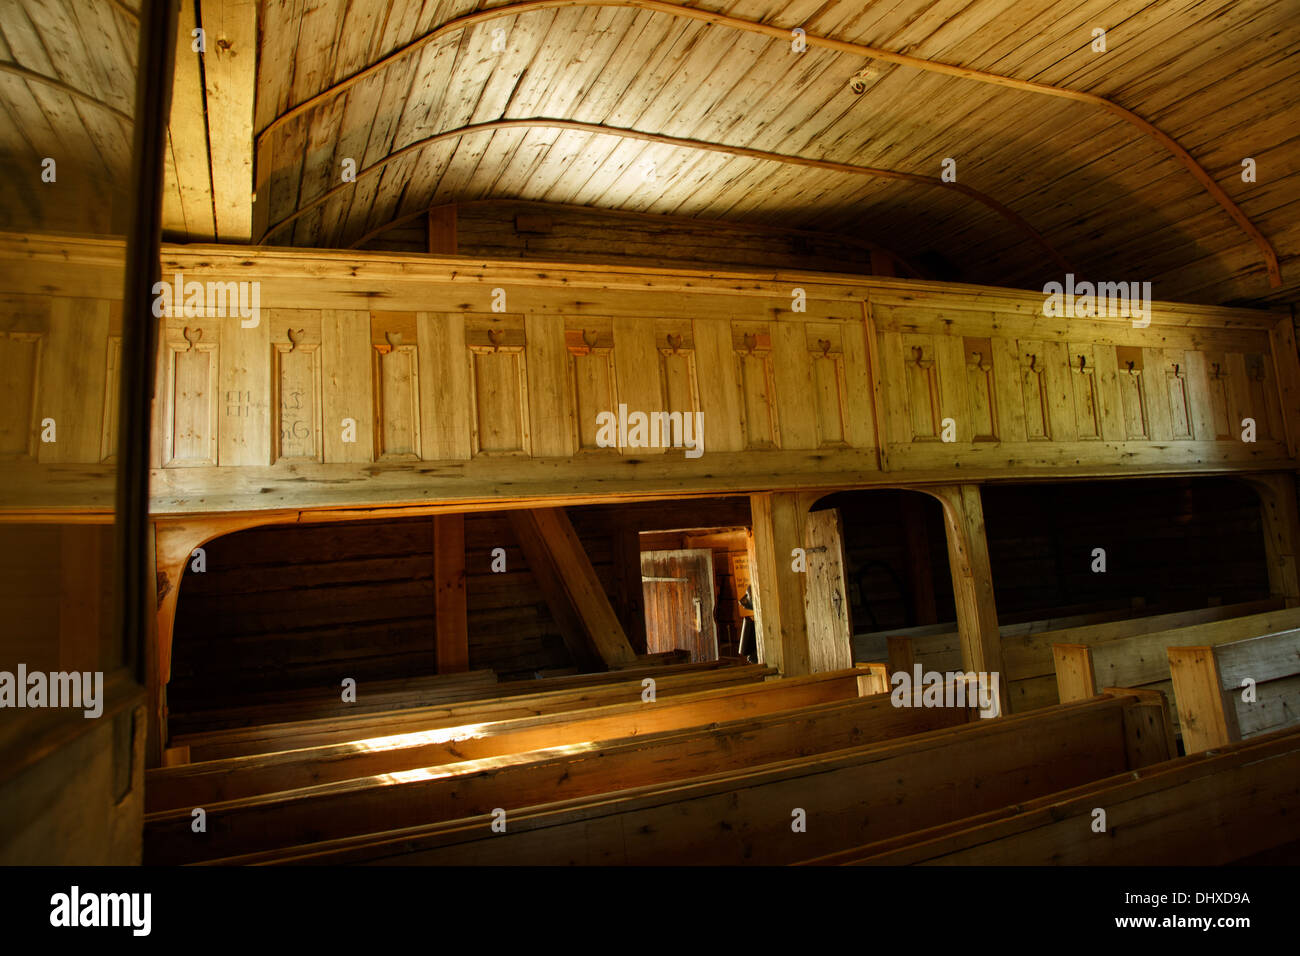 The 'Lapp Church' of Sodankylä is one of Finland's oldest wooden churches. It was built of logs by local labor in 1689. Stock Photo